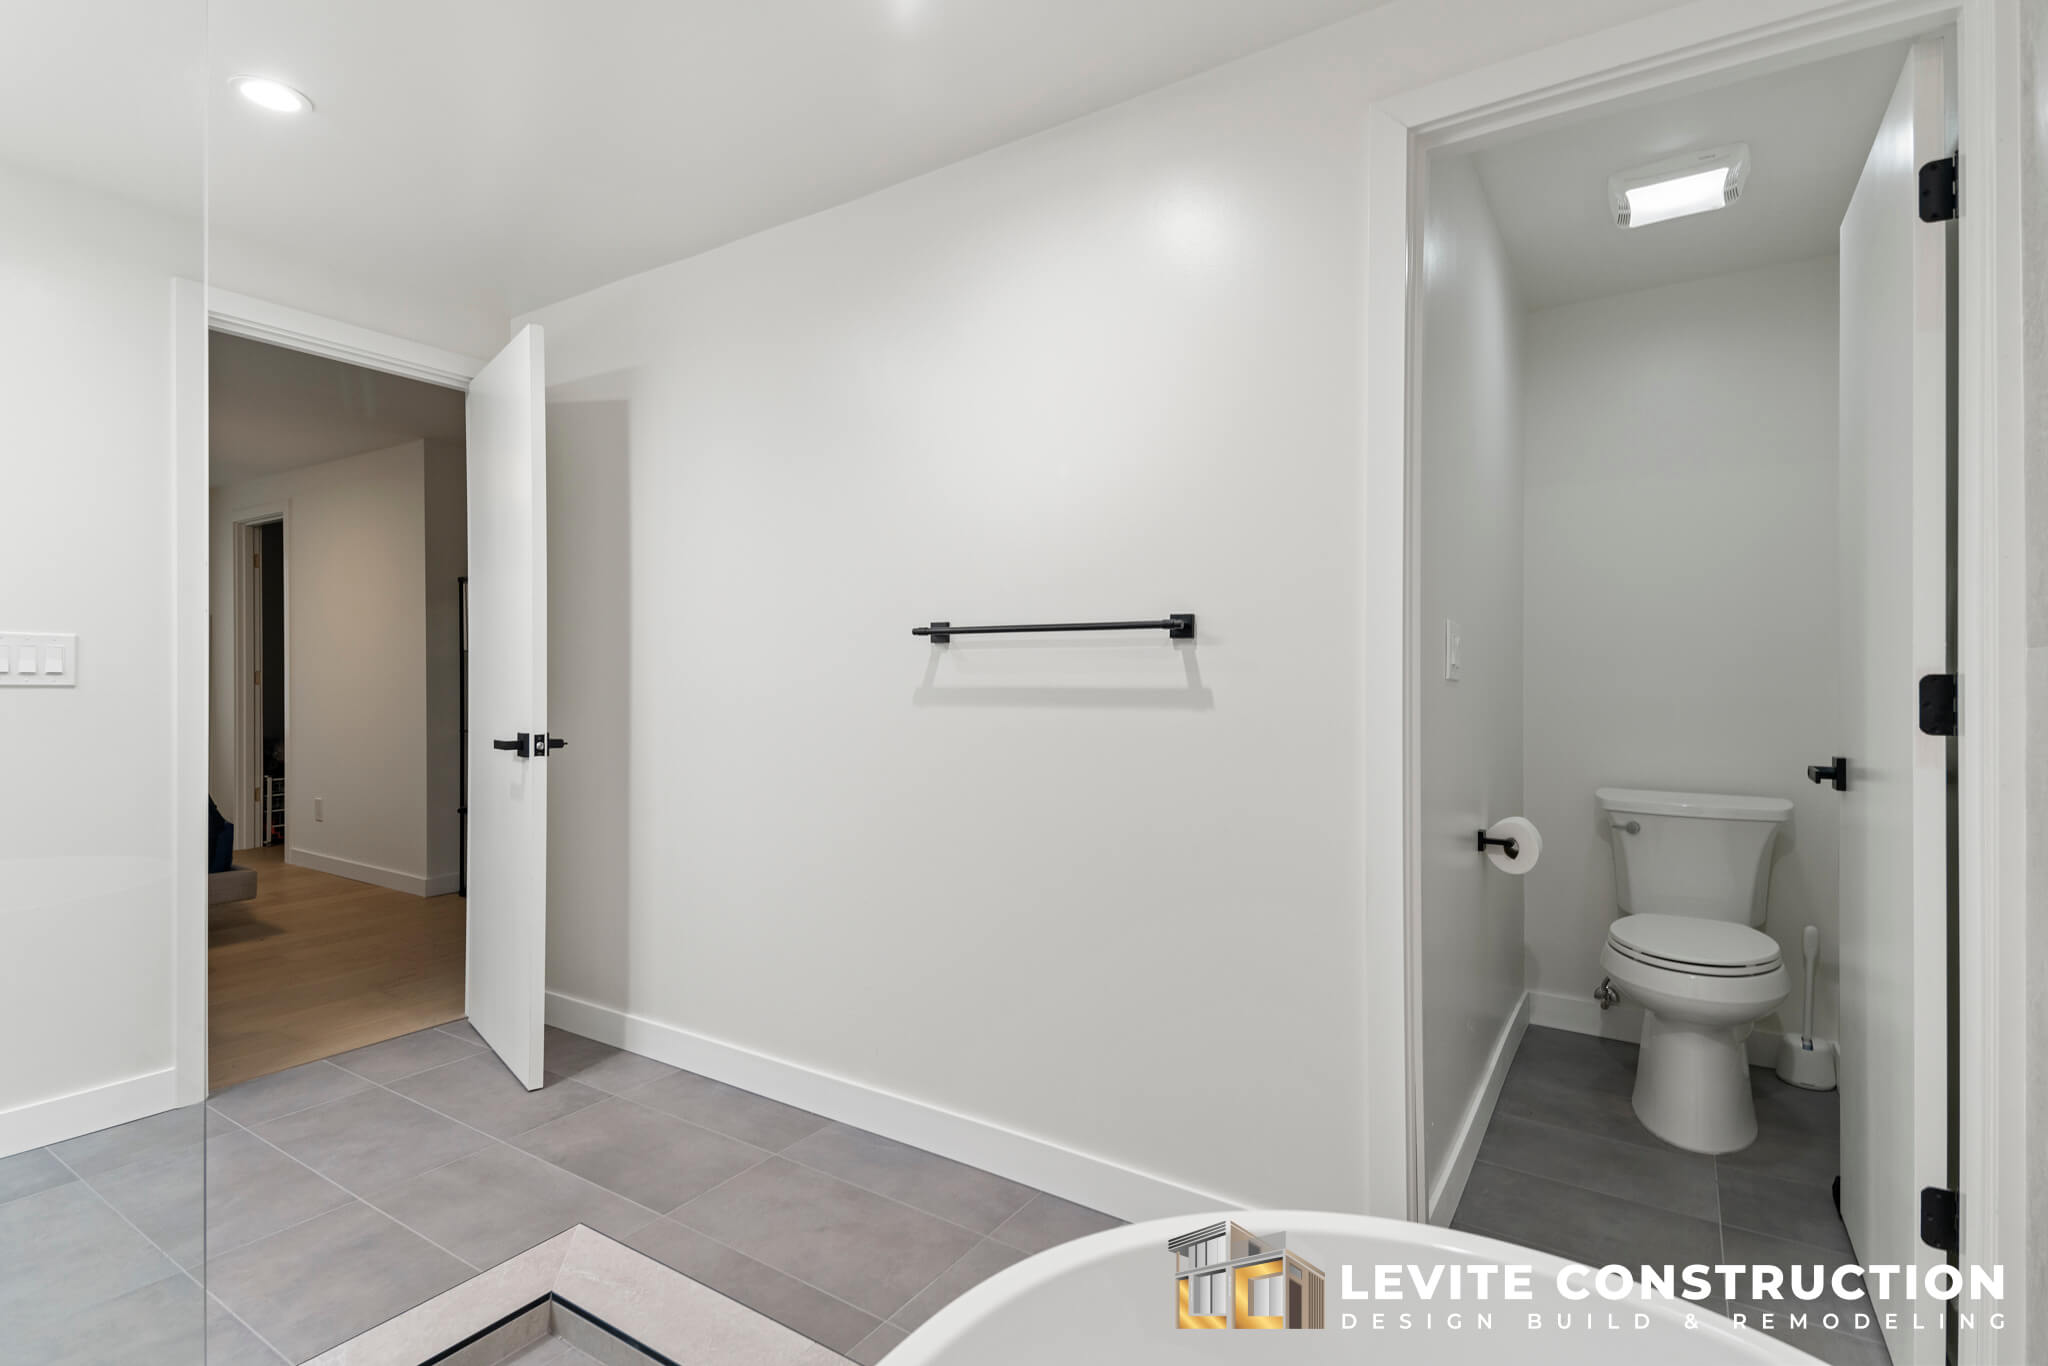 Levite Construction Bathroom Remodeling in Seattle